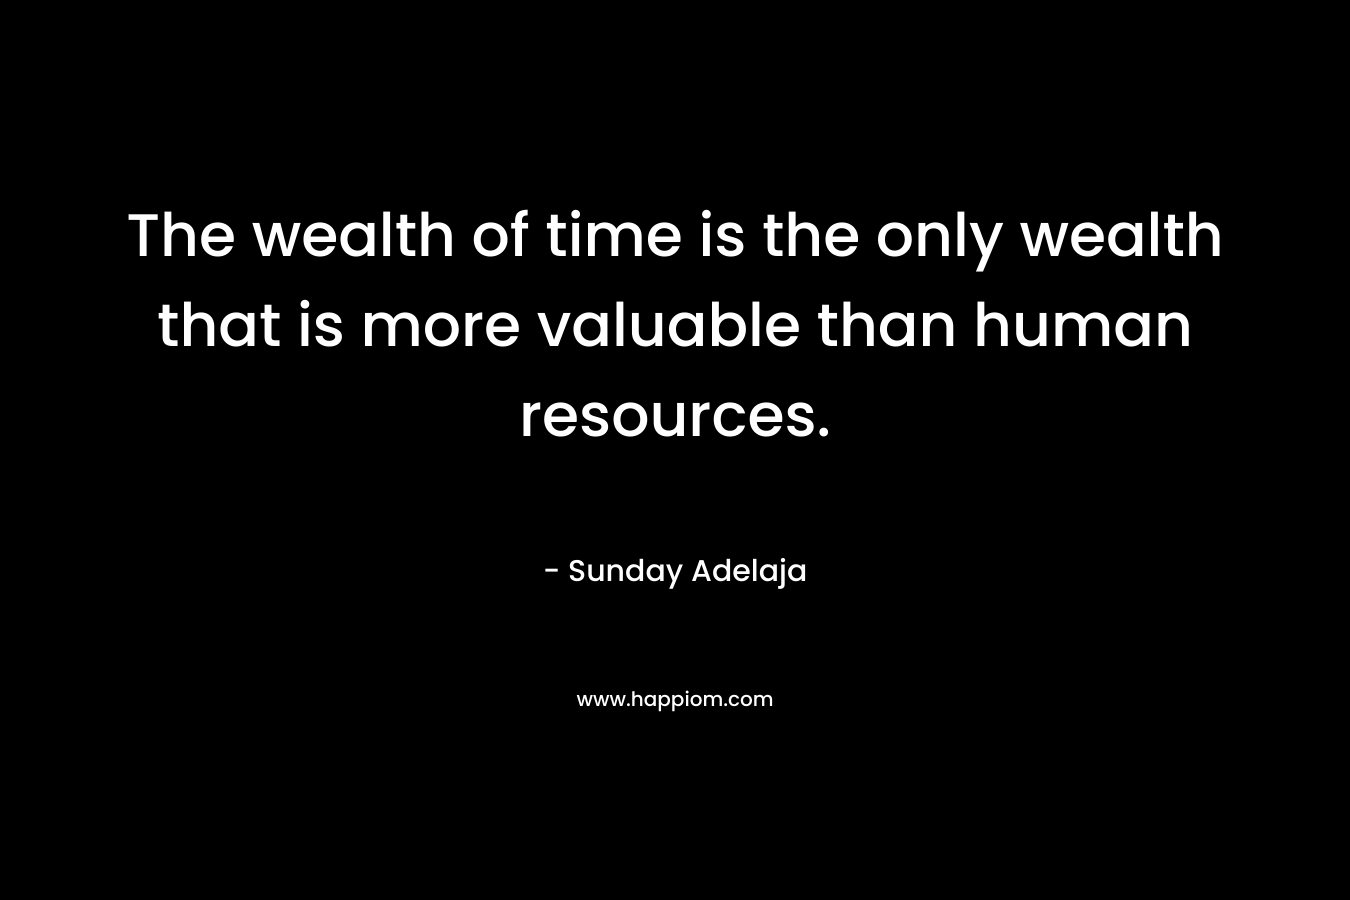 The wealth of time is the only wealth that is more valuable than human resources.